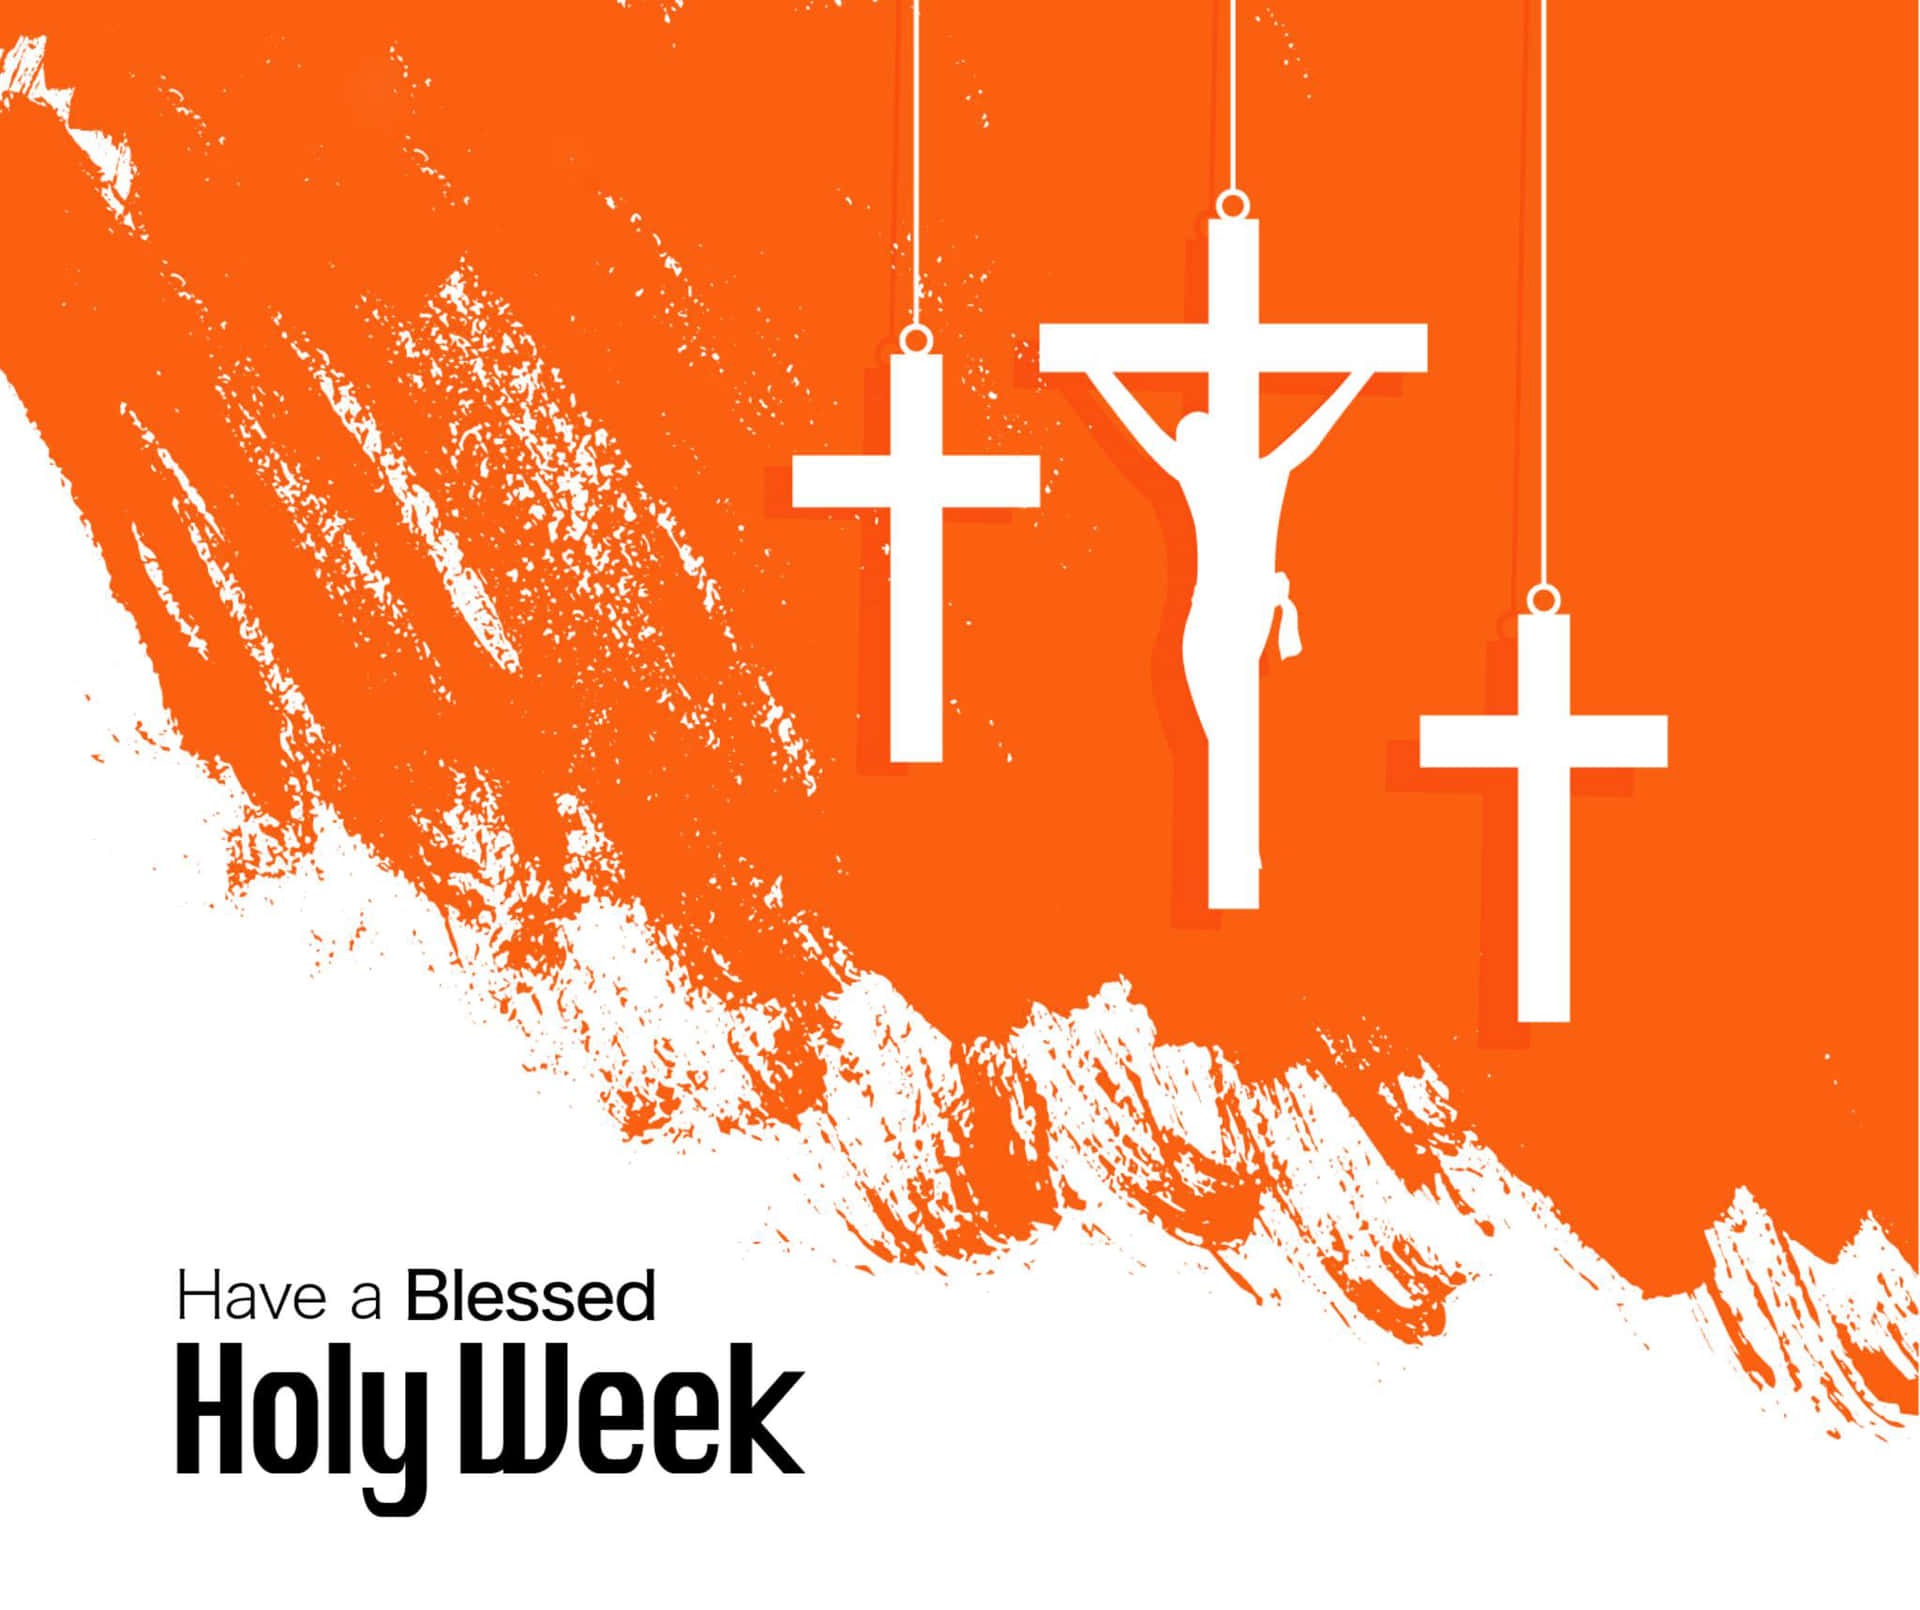 Say goodbye to Lent with a joyous Holy Week celebration Wallpaper